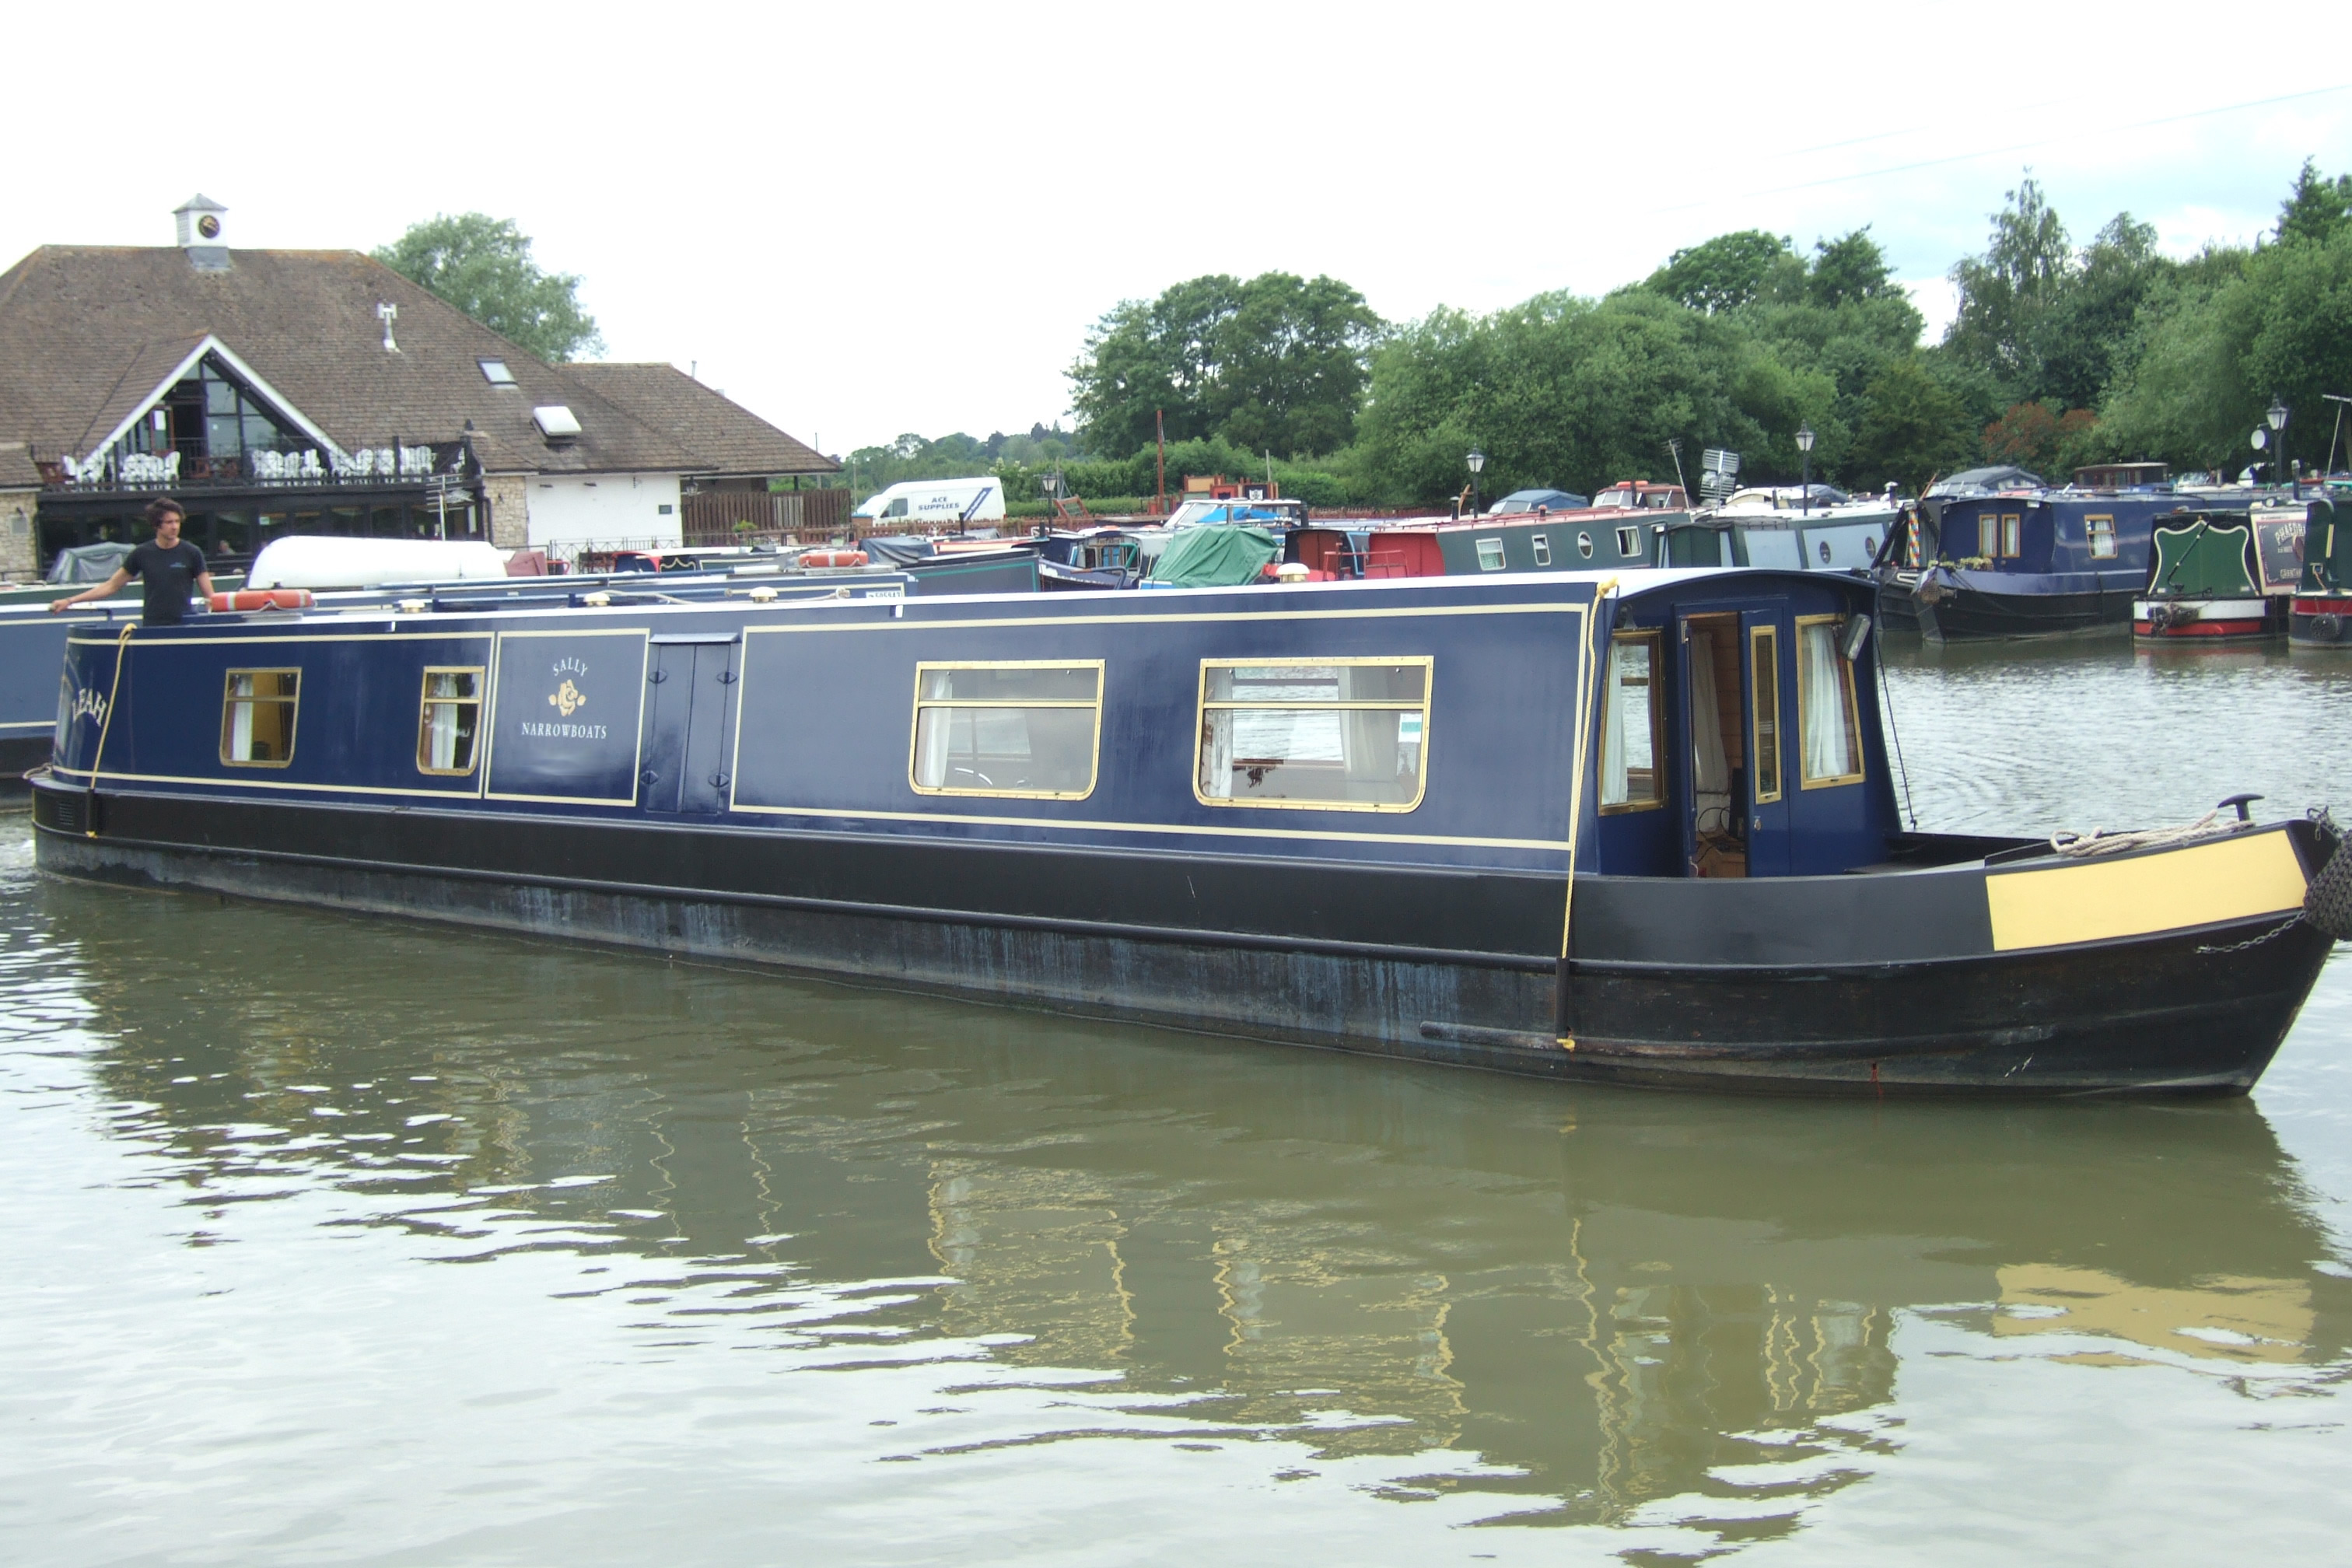 The S-Leah class canal boat